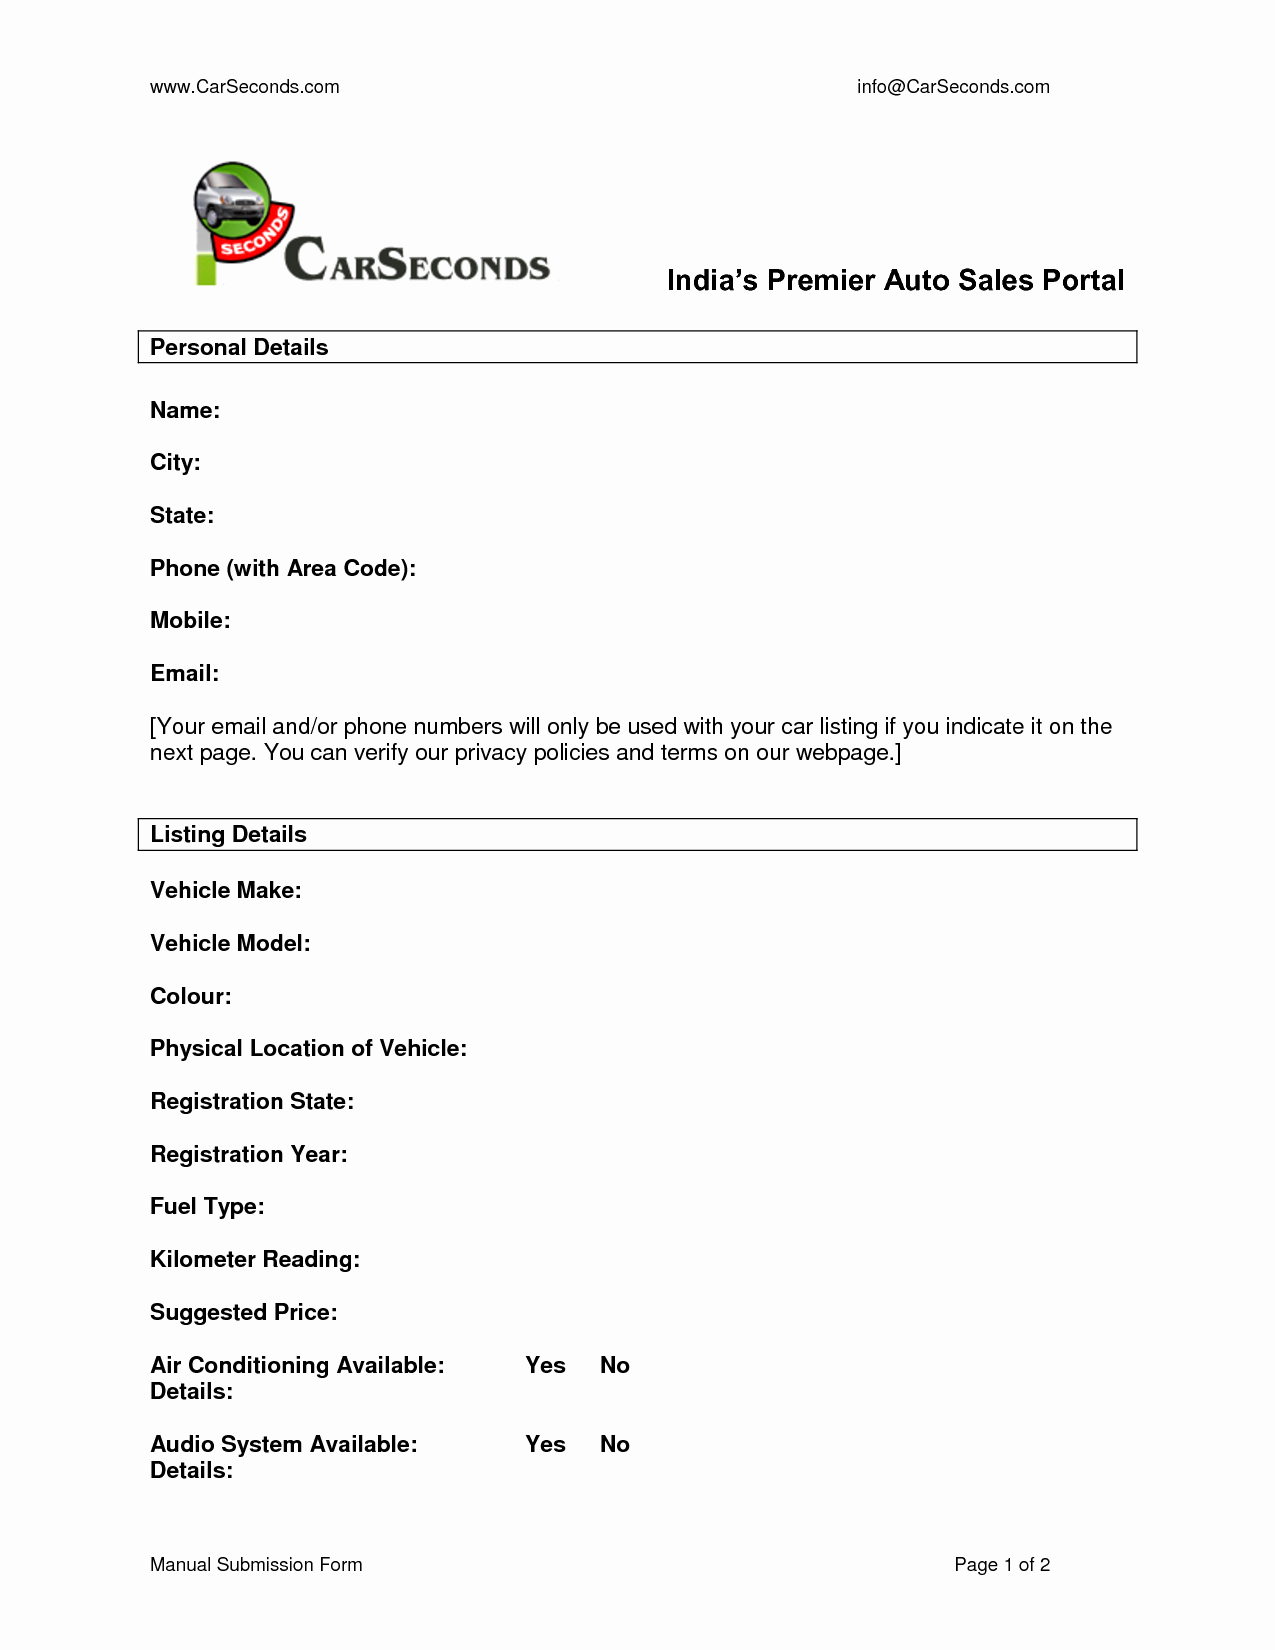 Receipt Of Sales for Car Fresh 8 Best Of Car Sale Receipt Template Used Car